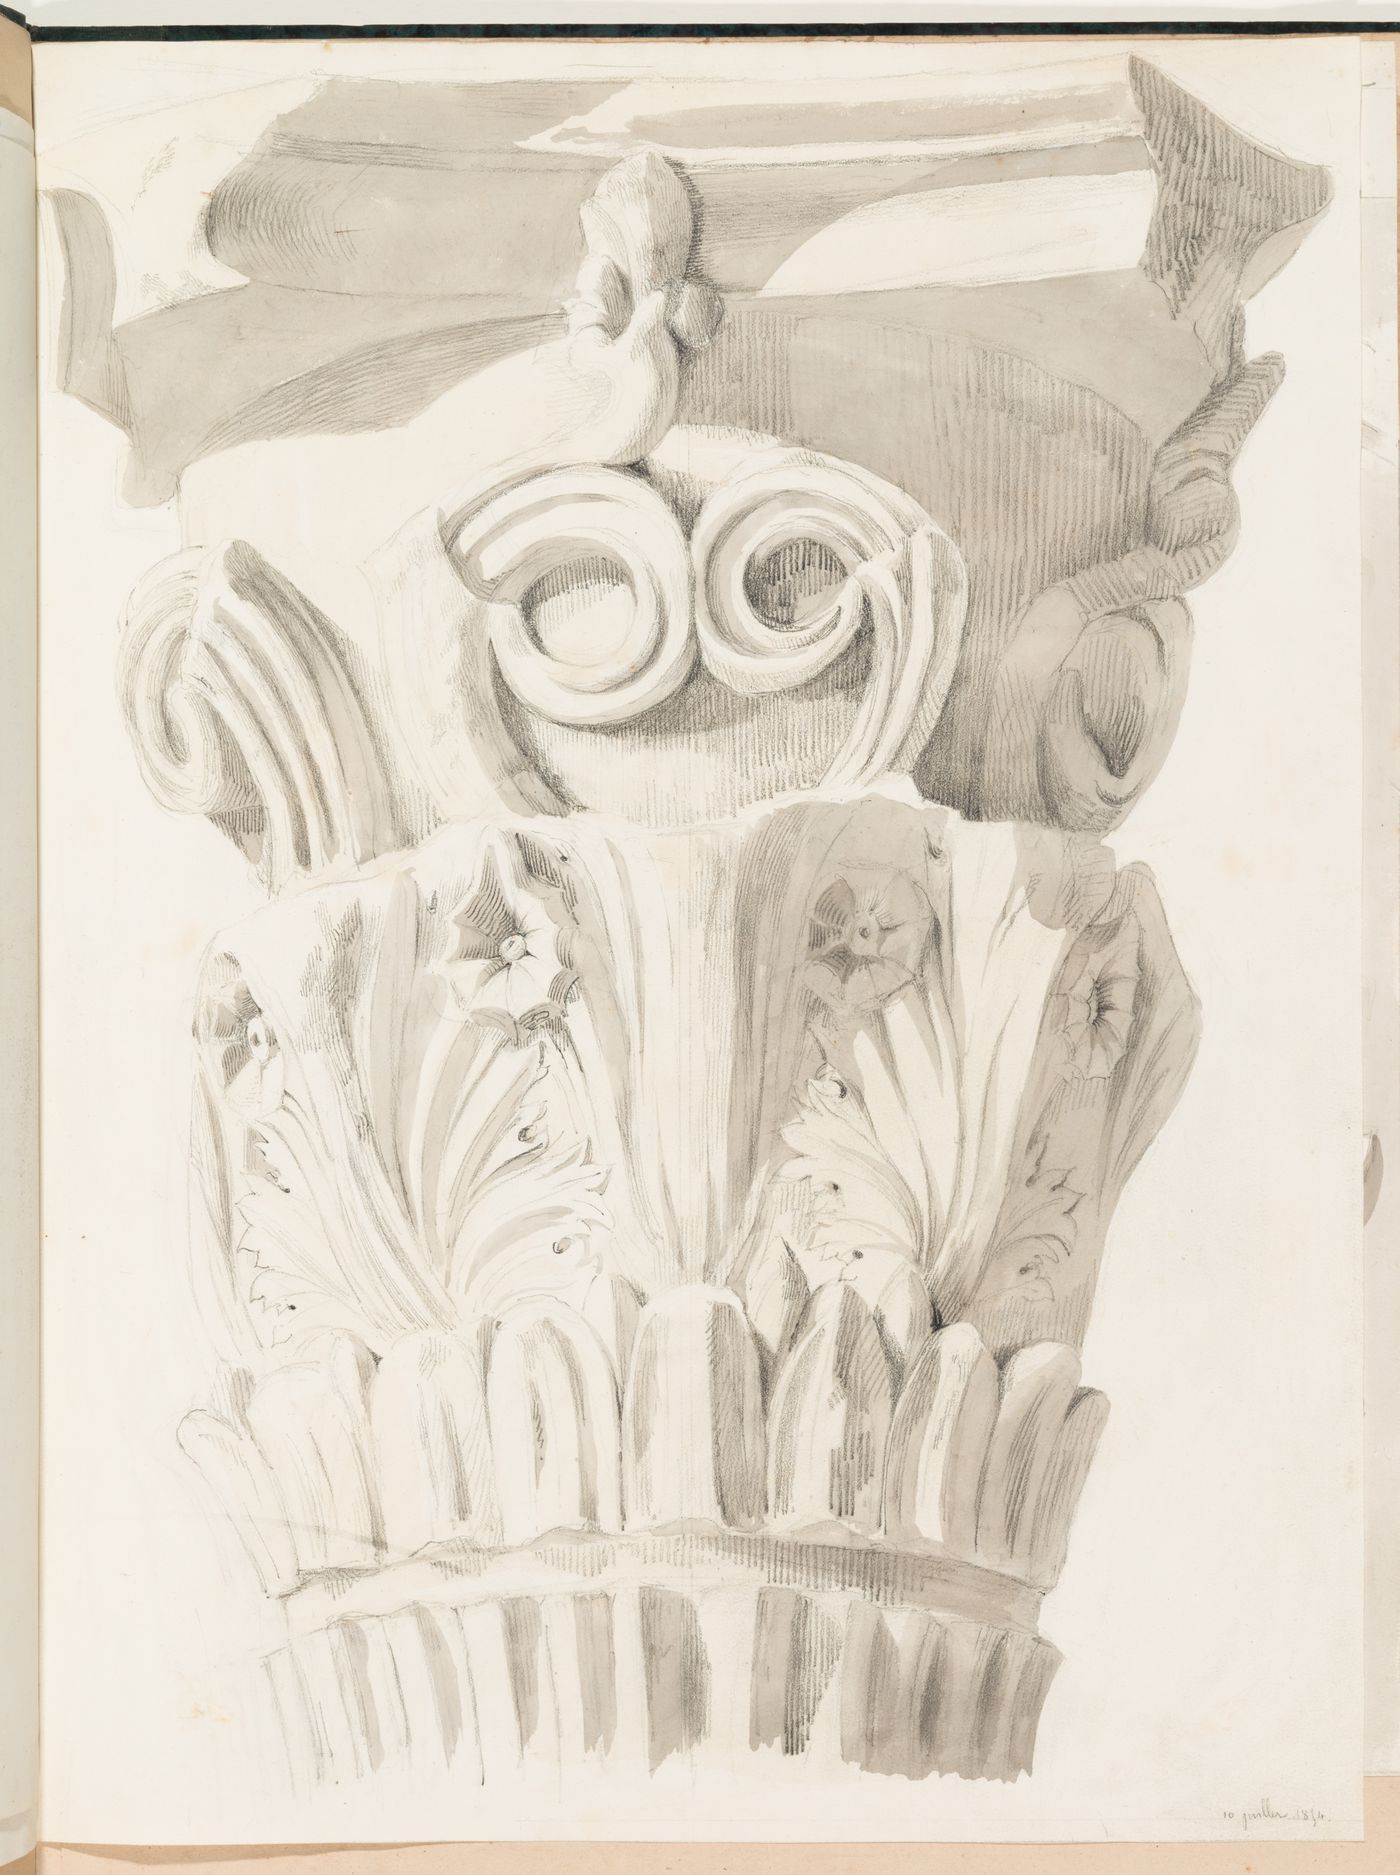 Elevation of a capital